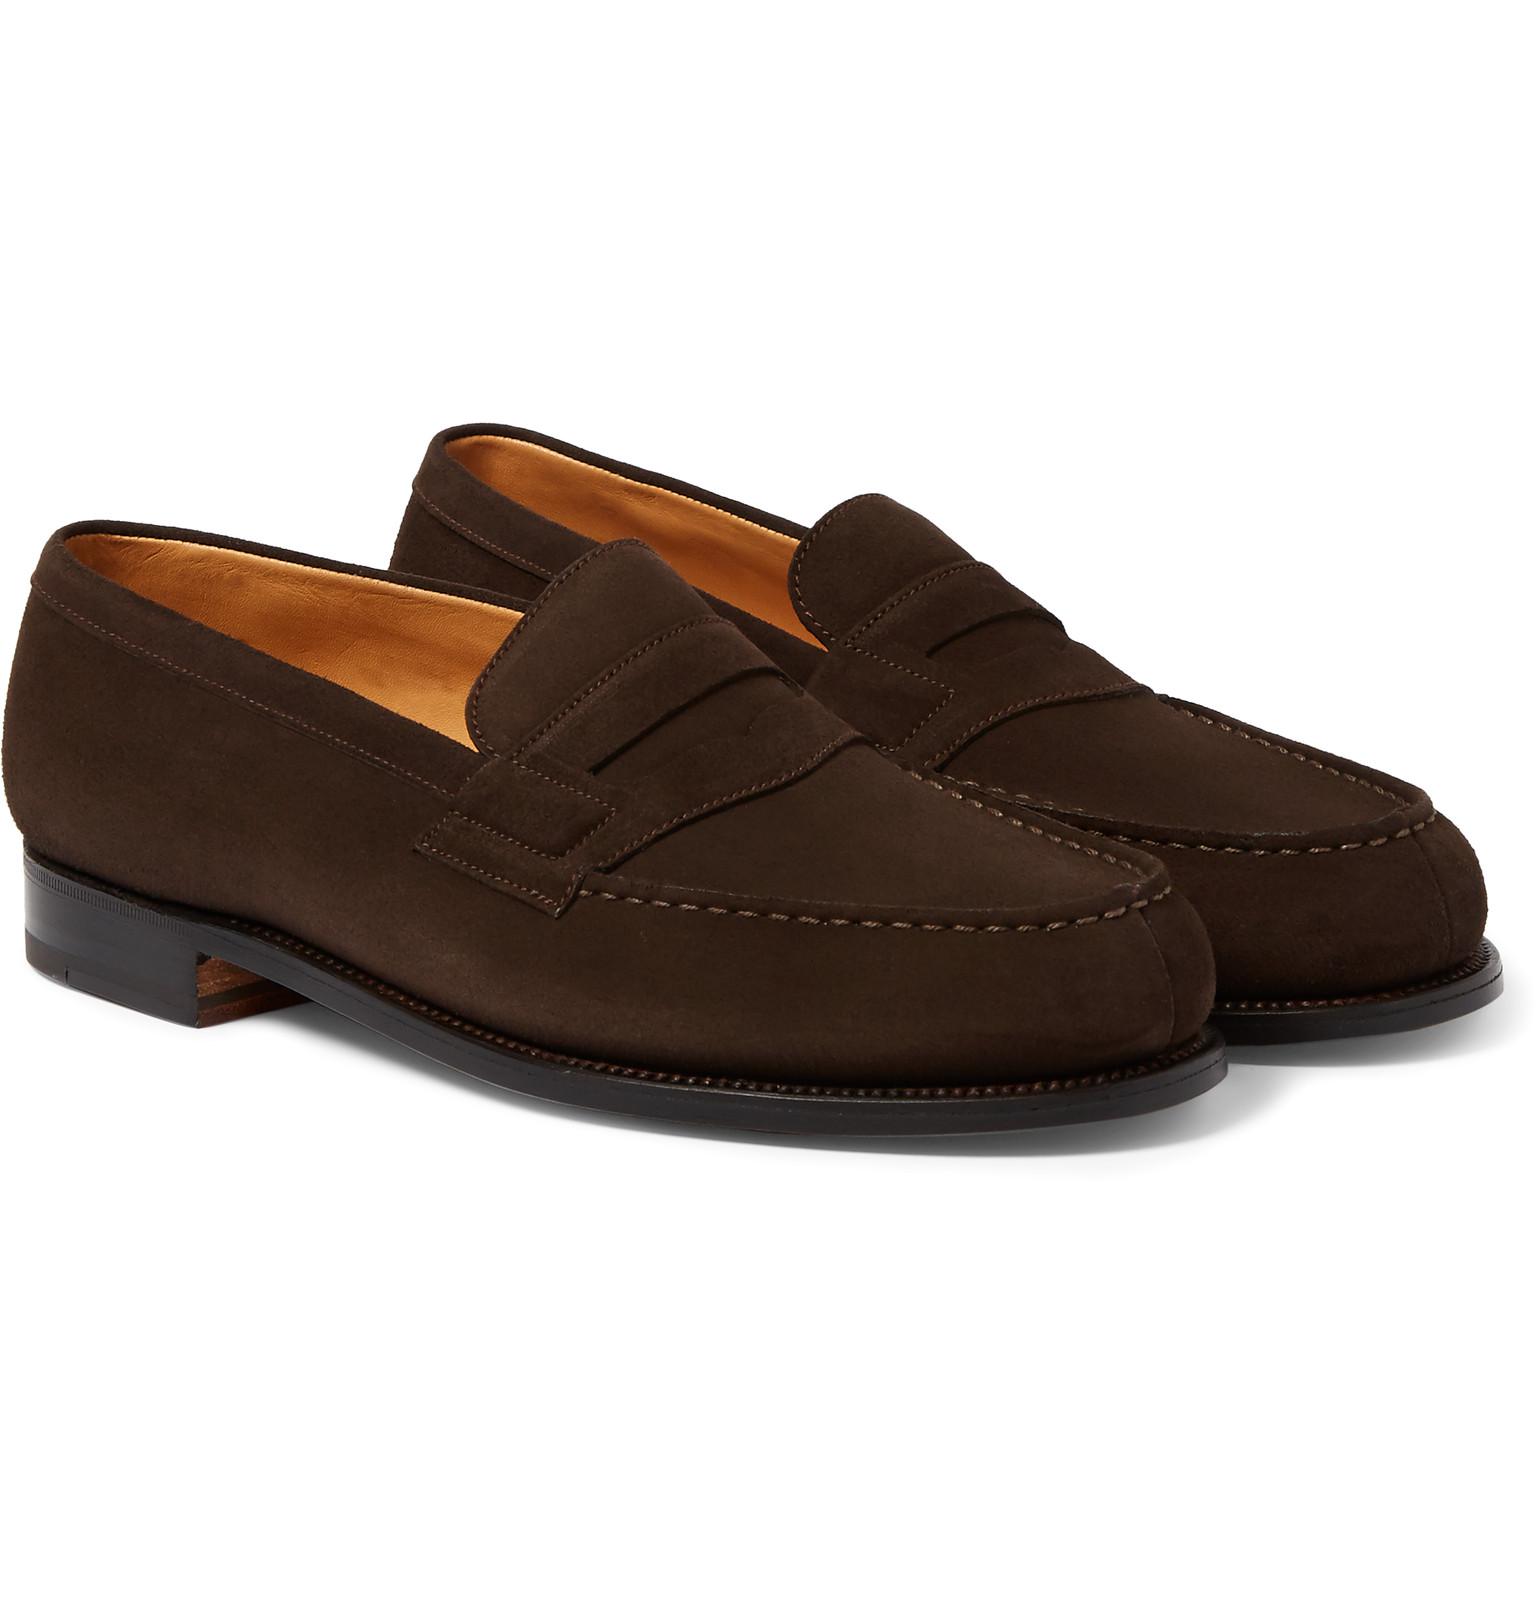 Lyst - J.M. Weston 180 The Moccasin Suede Loafers in Brown for Men